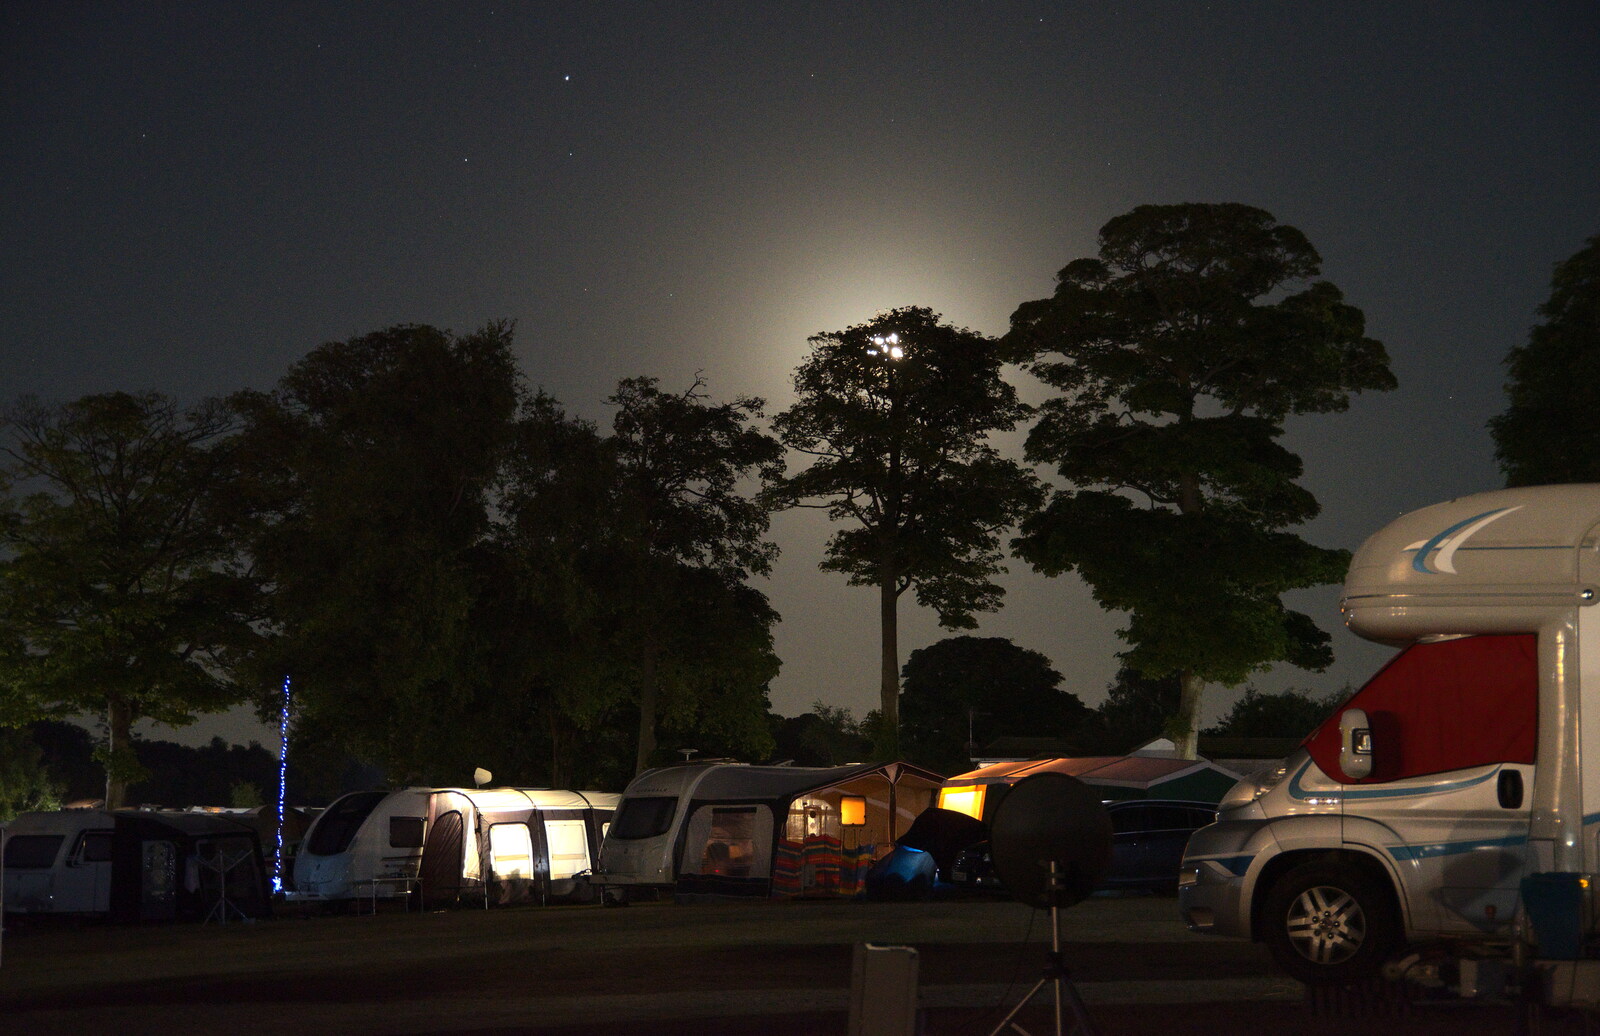 The moon rises over the campsite from Camping at Forest Park, Cromer, Norfolk - 12th August 2022